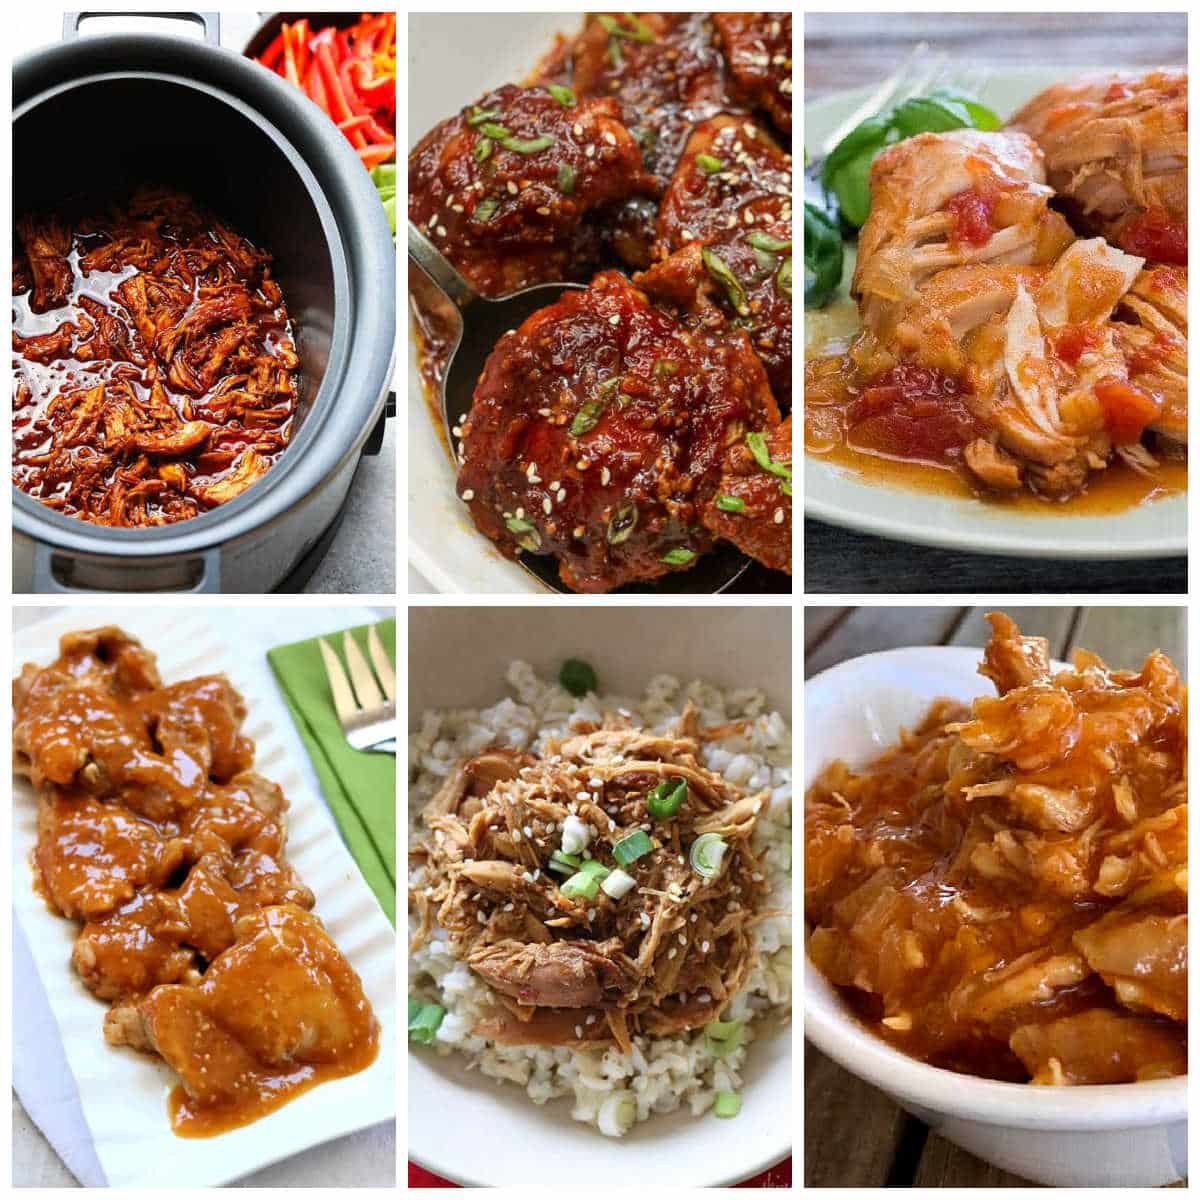 Slow Cooker Sriracha Chicken Recipes collage of featured recipes.